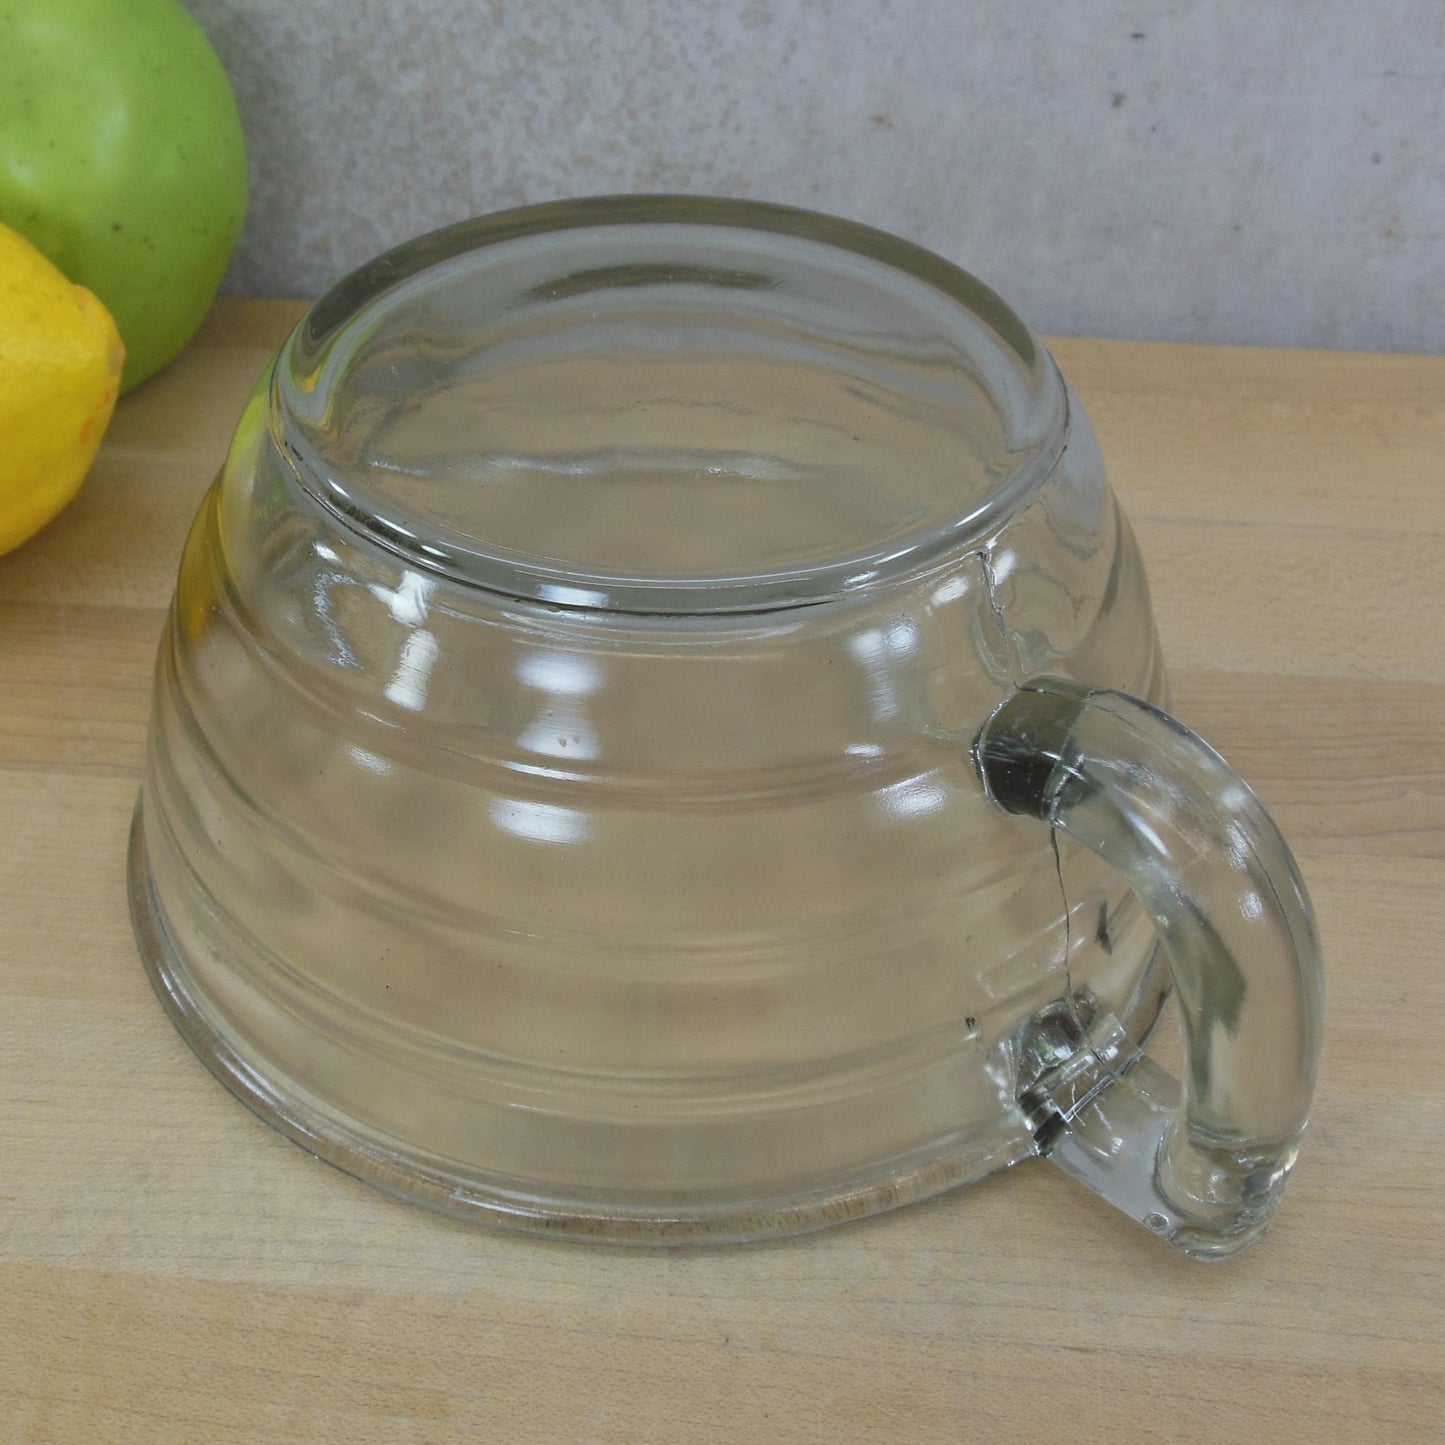 Unbranded Clear Glass Beehive Reamer Juicer Base Bowl used